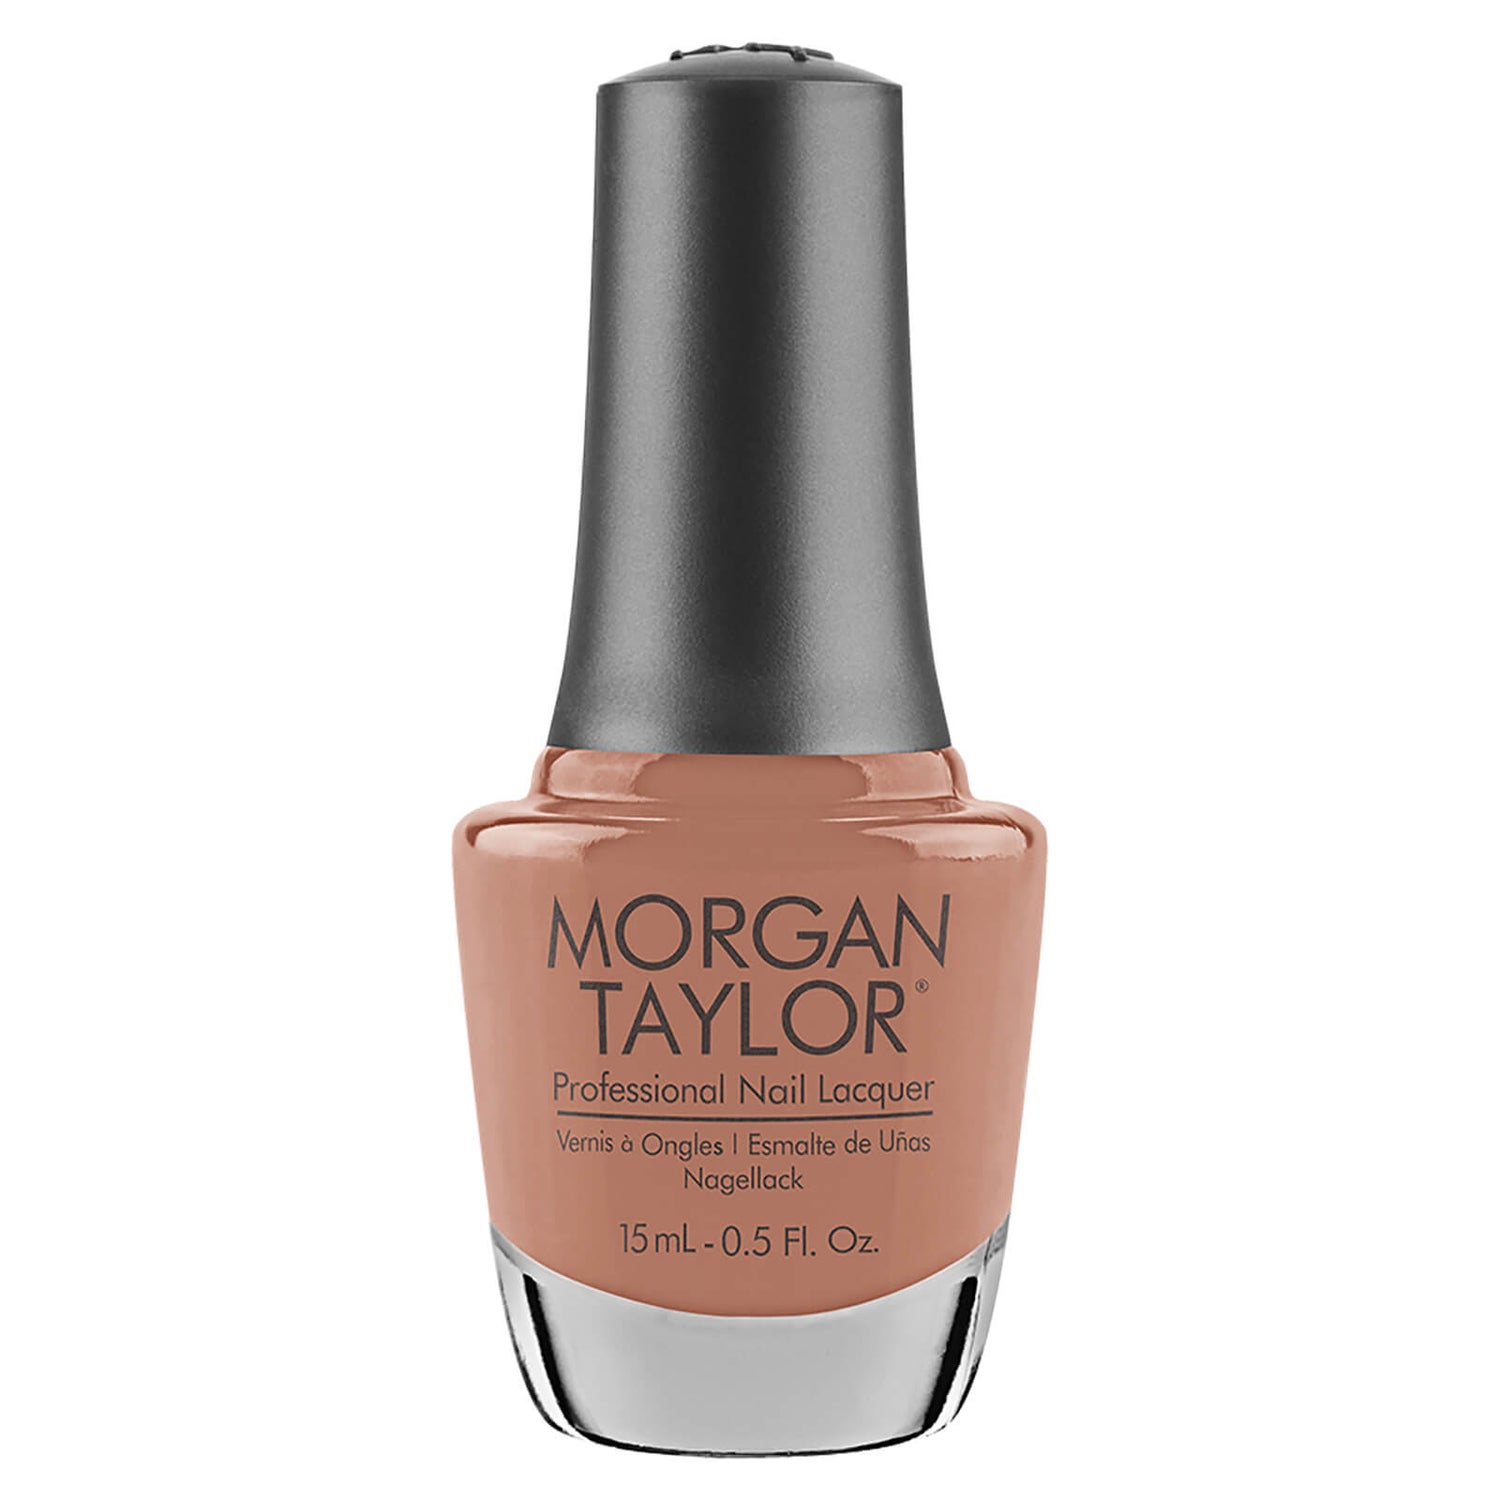 MORGAN TAYLOR Nail Lacquer in Up in the Air-Heart | GLOSSYBOX US